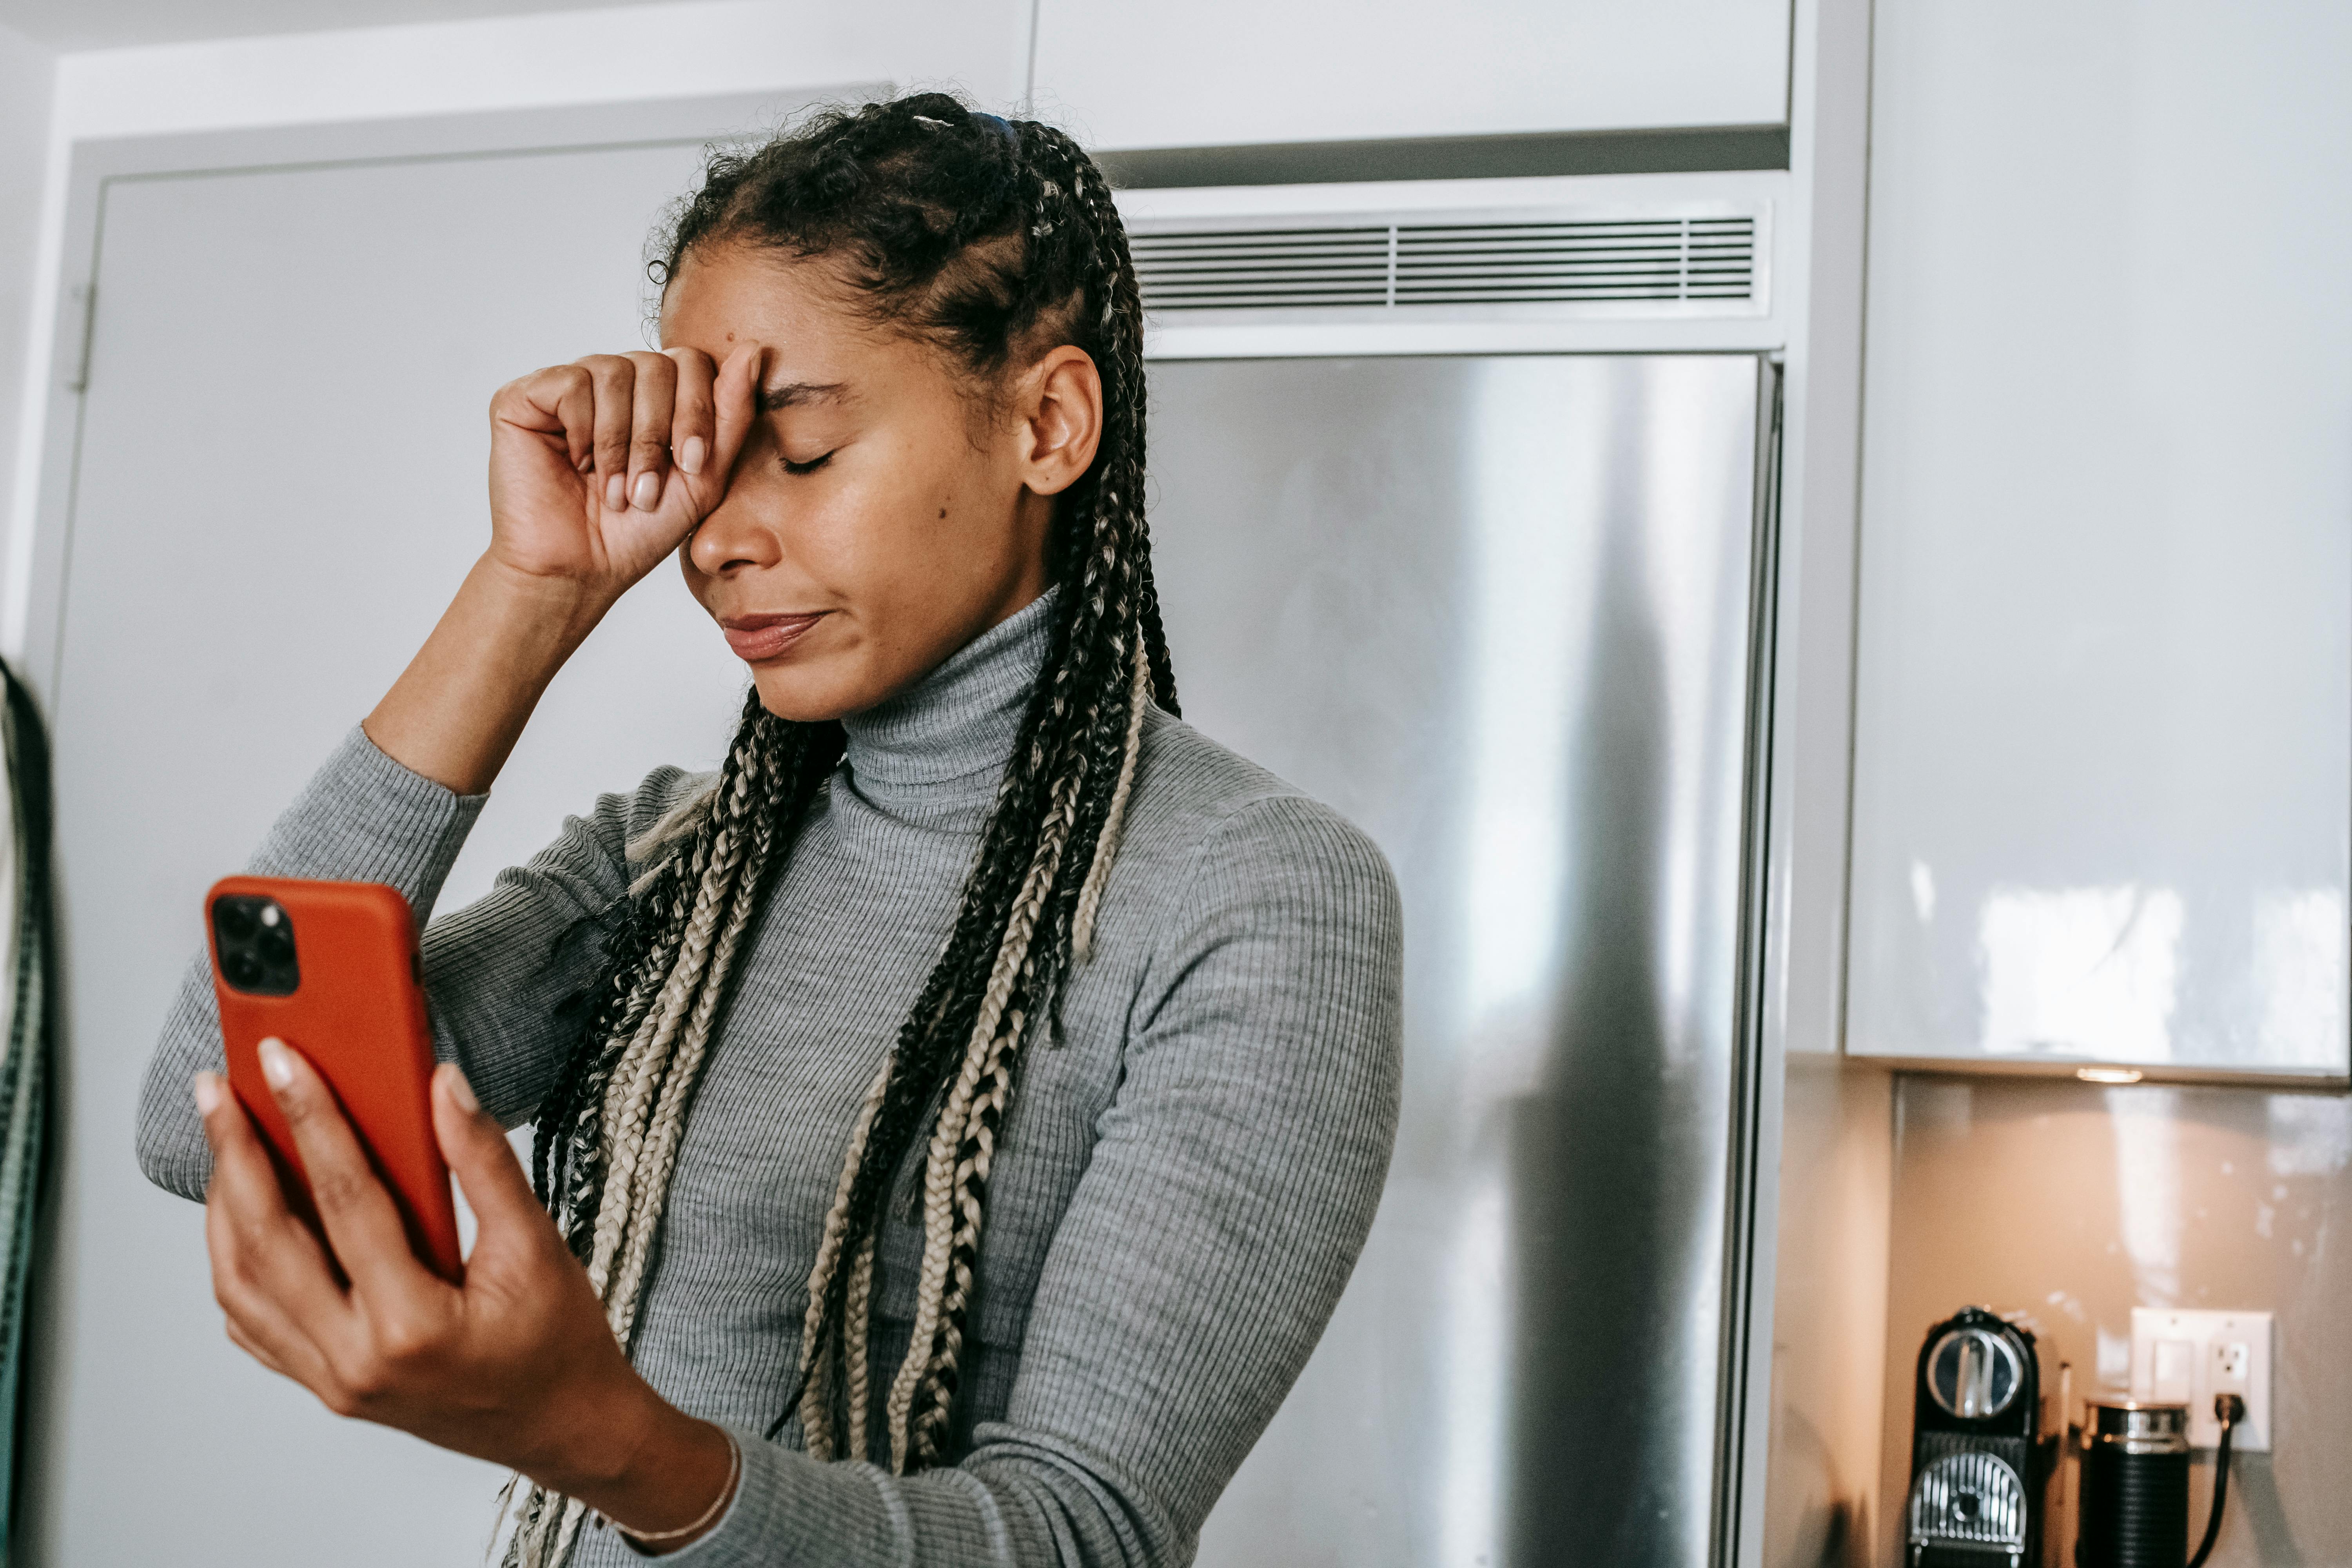 An upset woman with her hand on her forehead while holding a phone | Source: Pexels